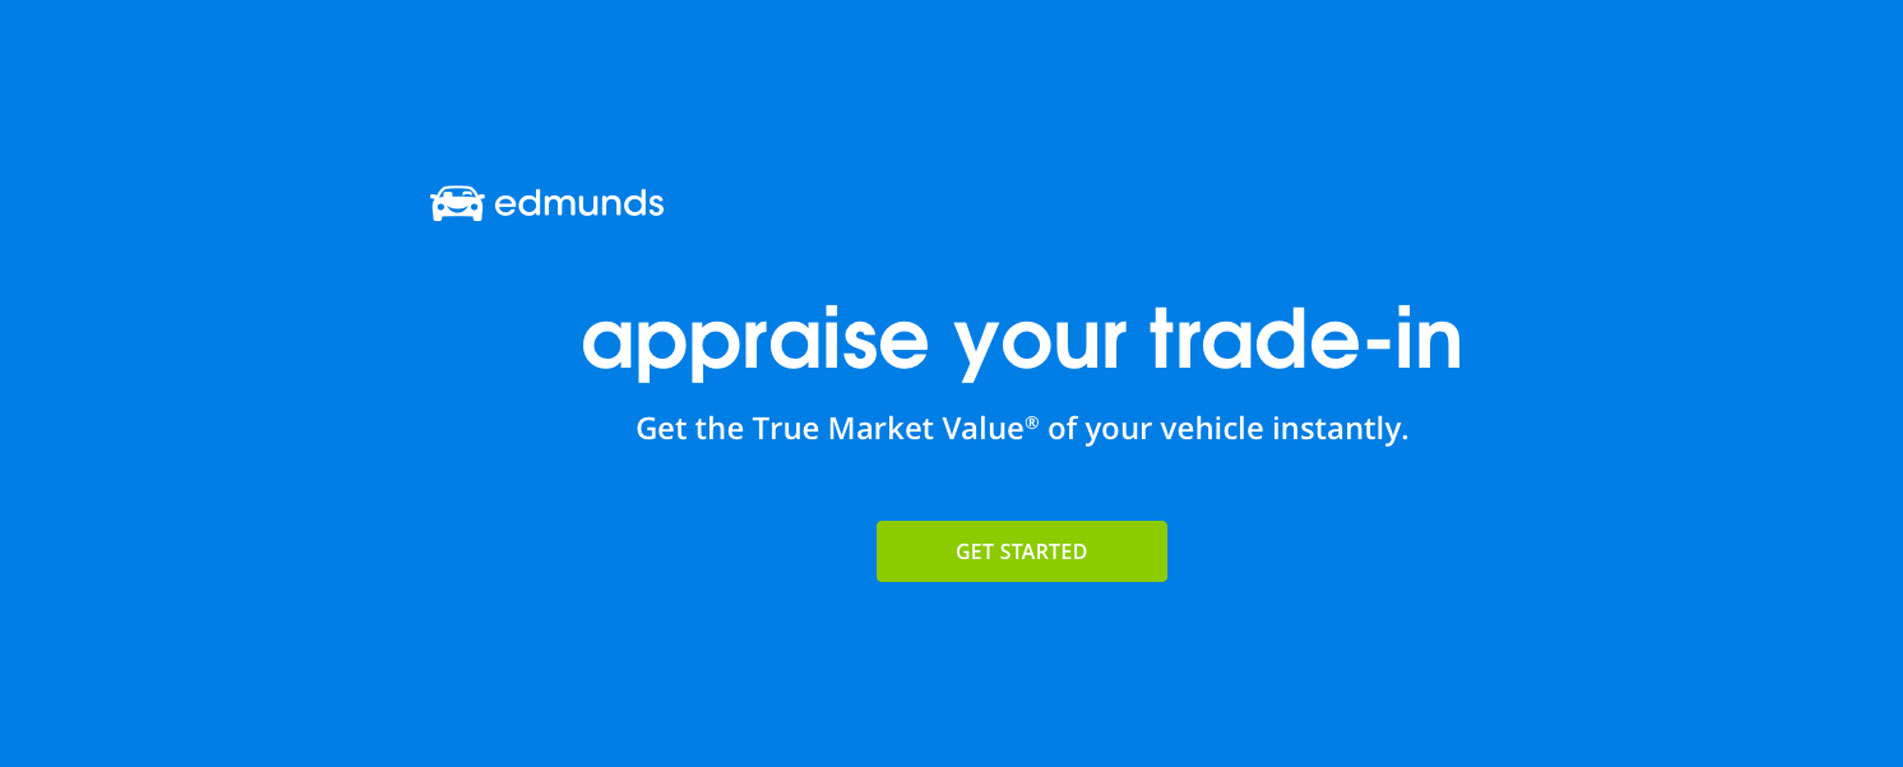 Appraise your trade-in